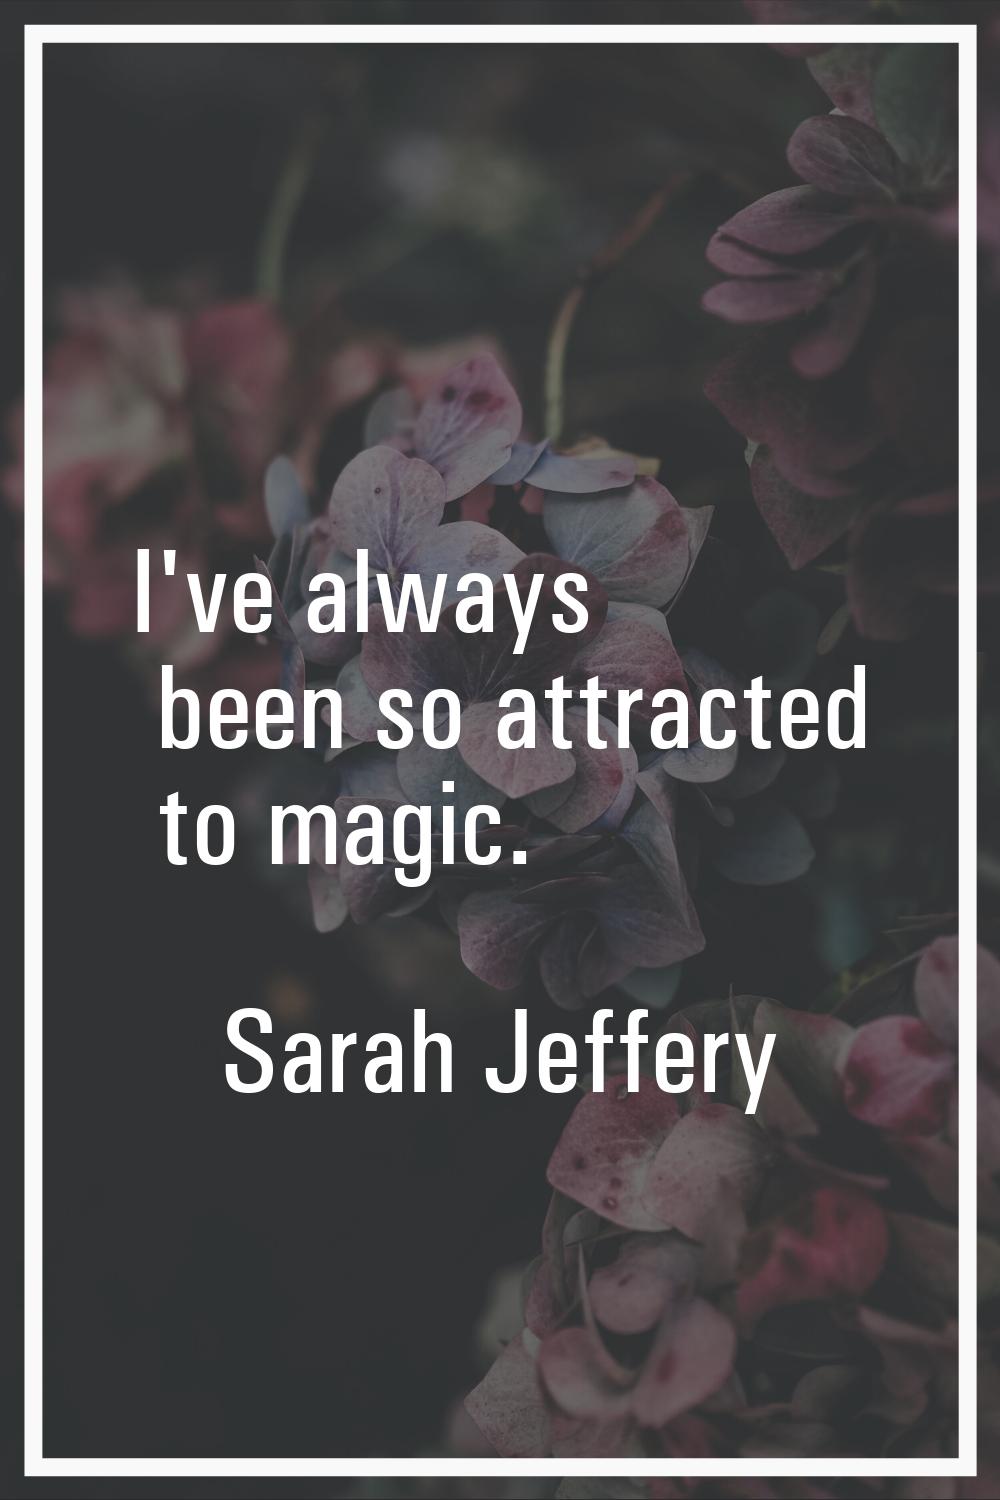 I've always been so attracted to magic.